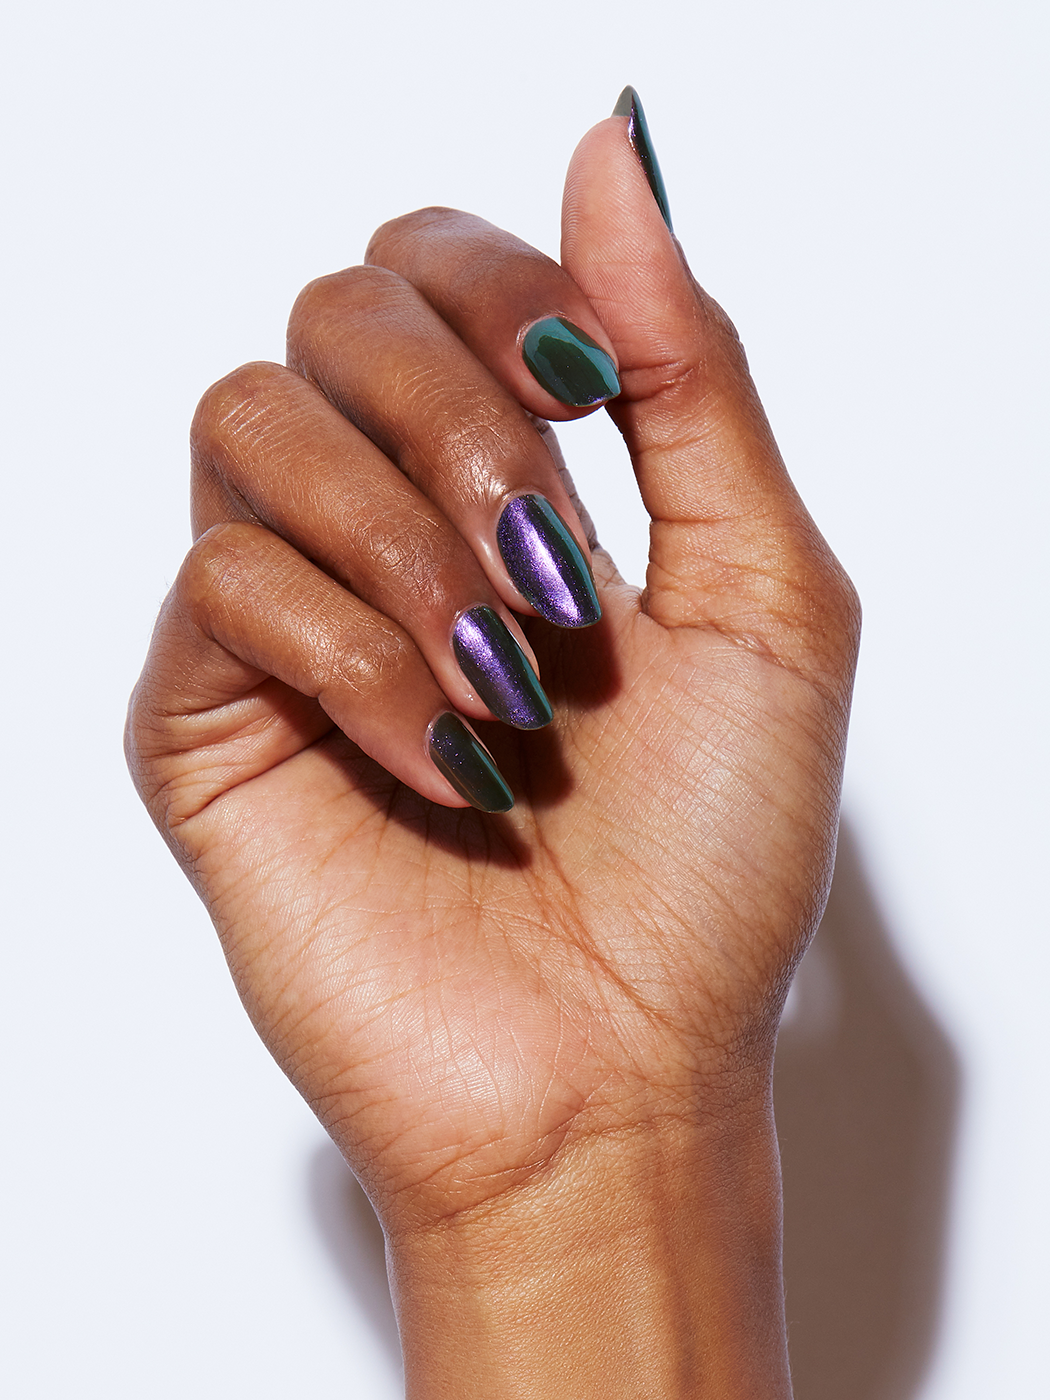 Purple duo chrome with a green flip, Full coverage, Rich